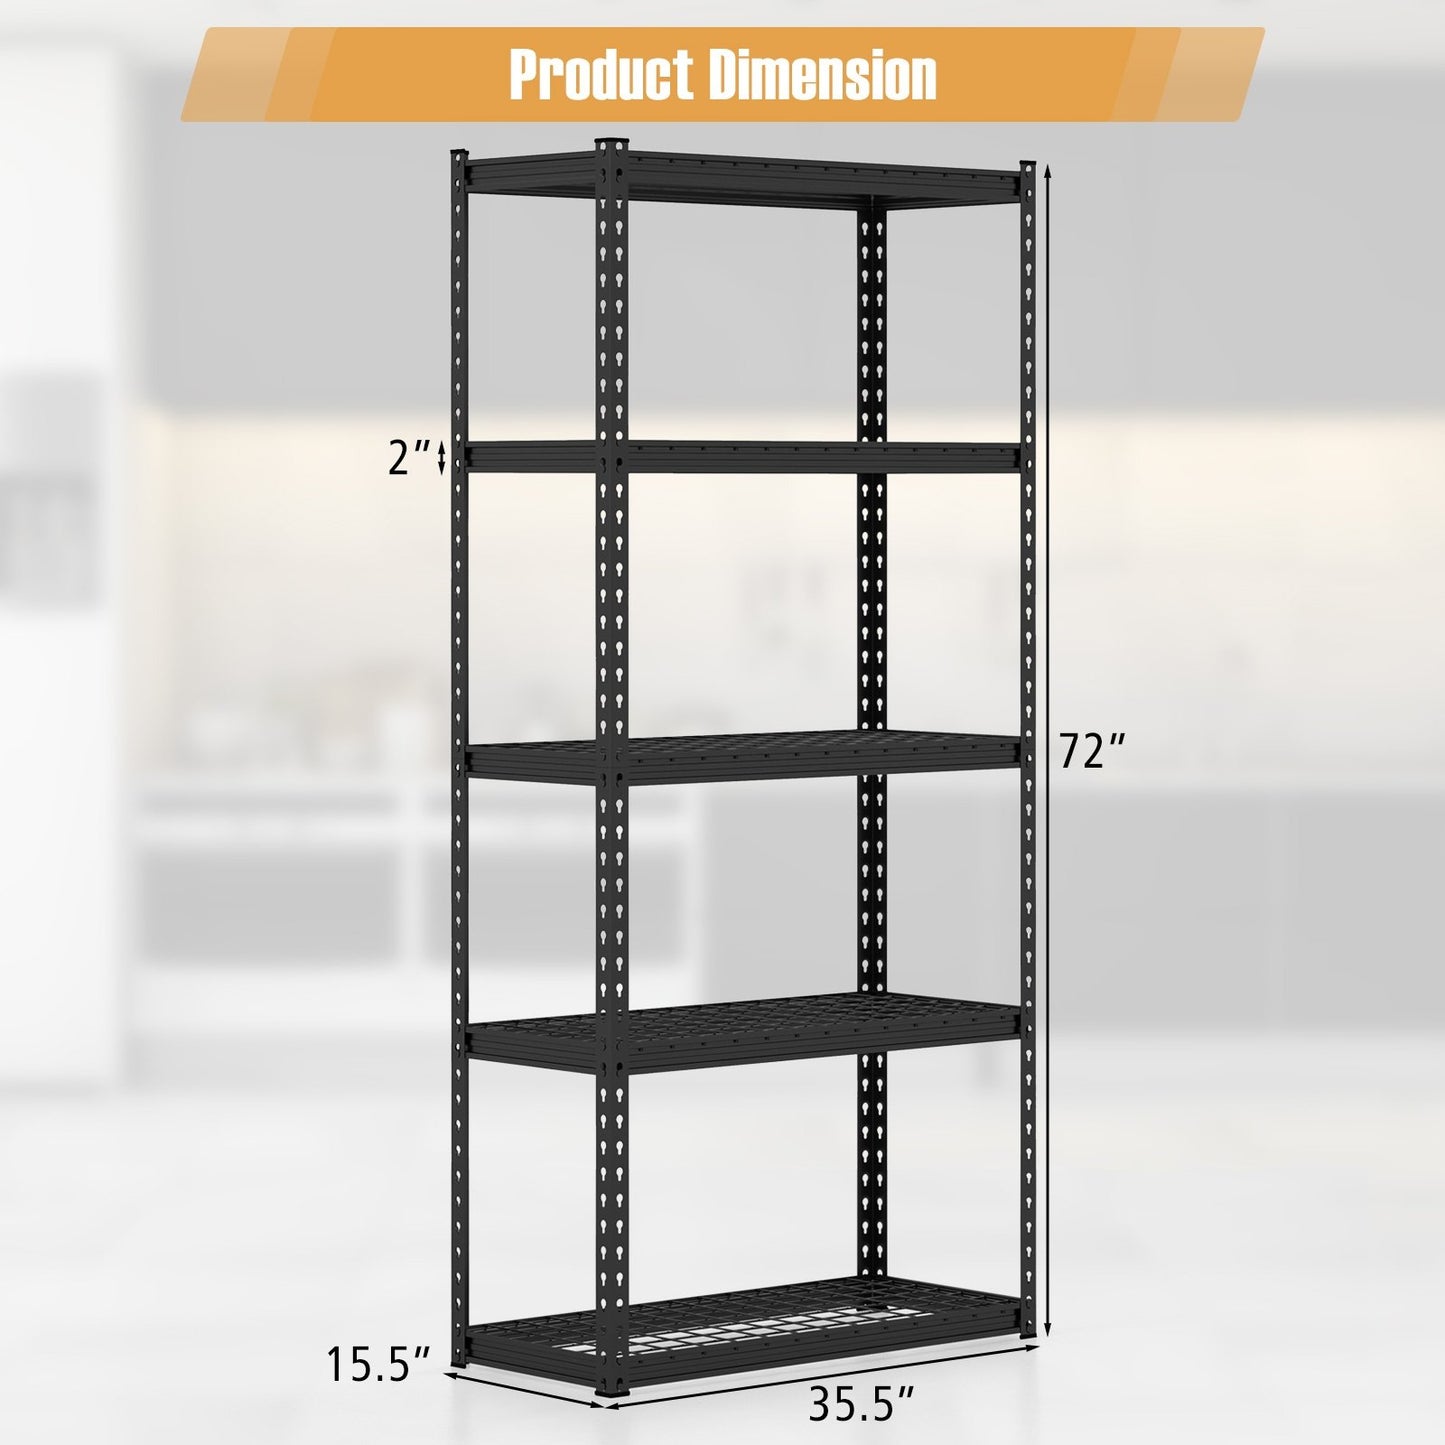 5-Tier Metal Shelving Unit with Anti-slip Foot Pad Height Adjustable Shelves for Garage-M, Black